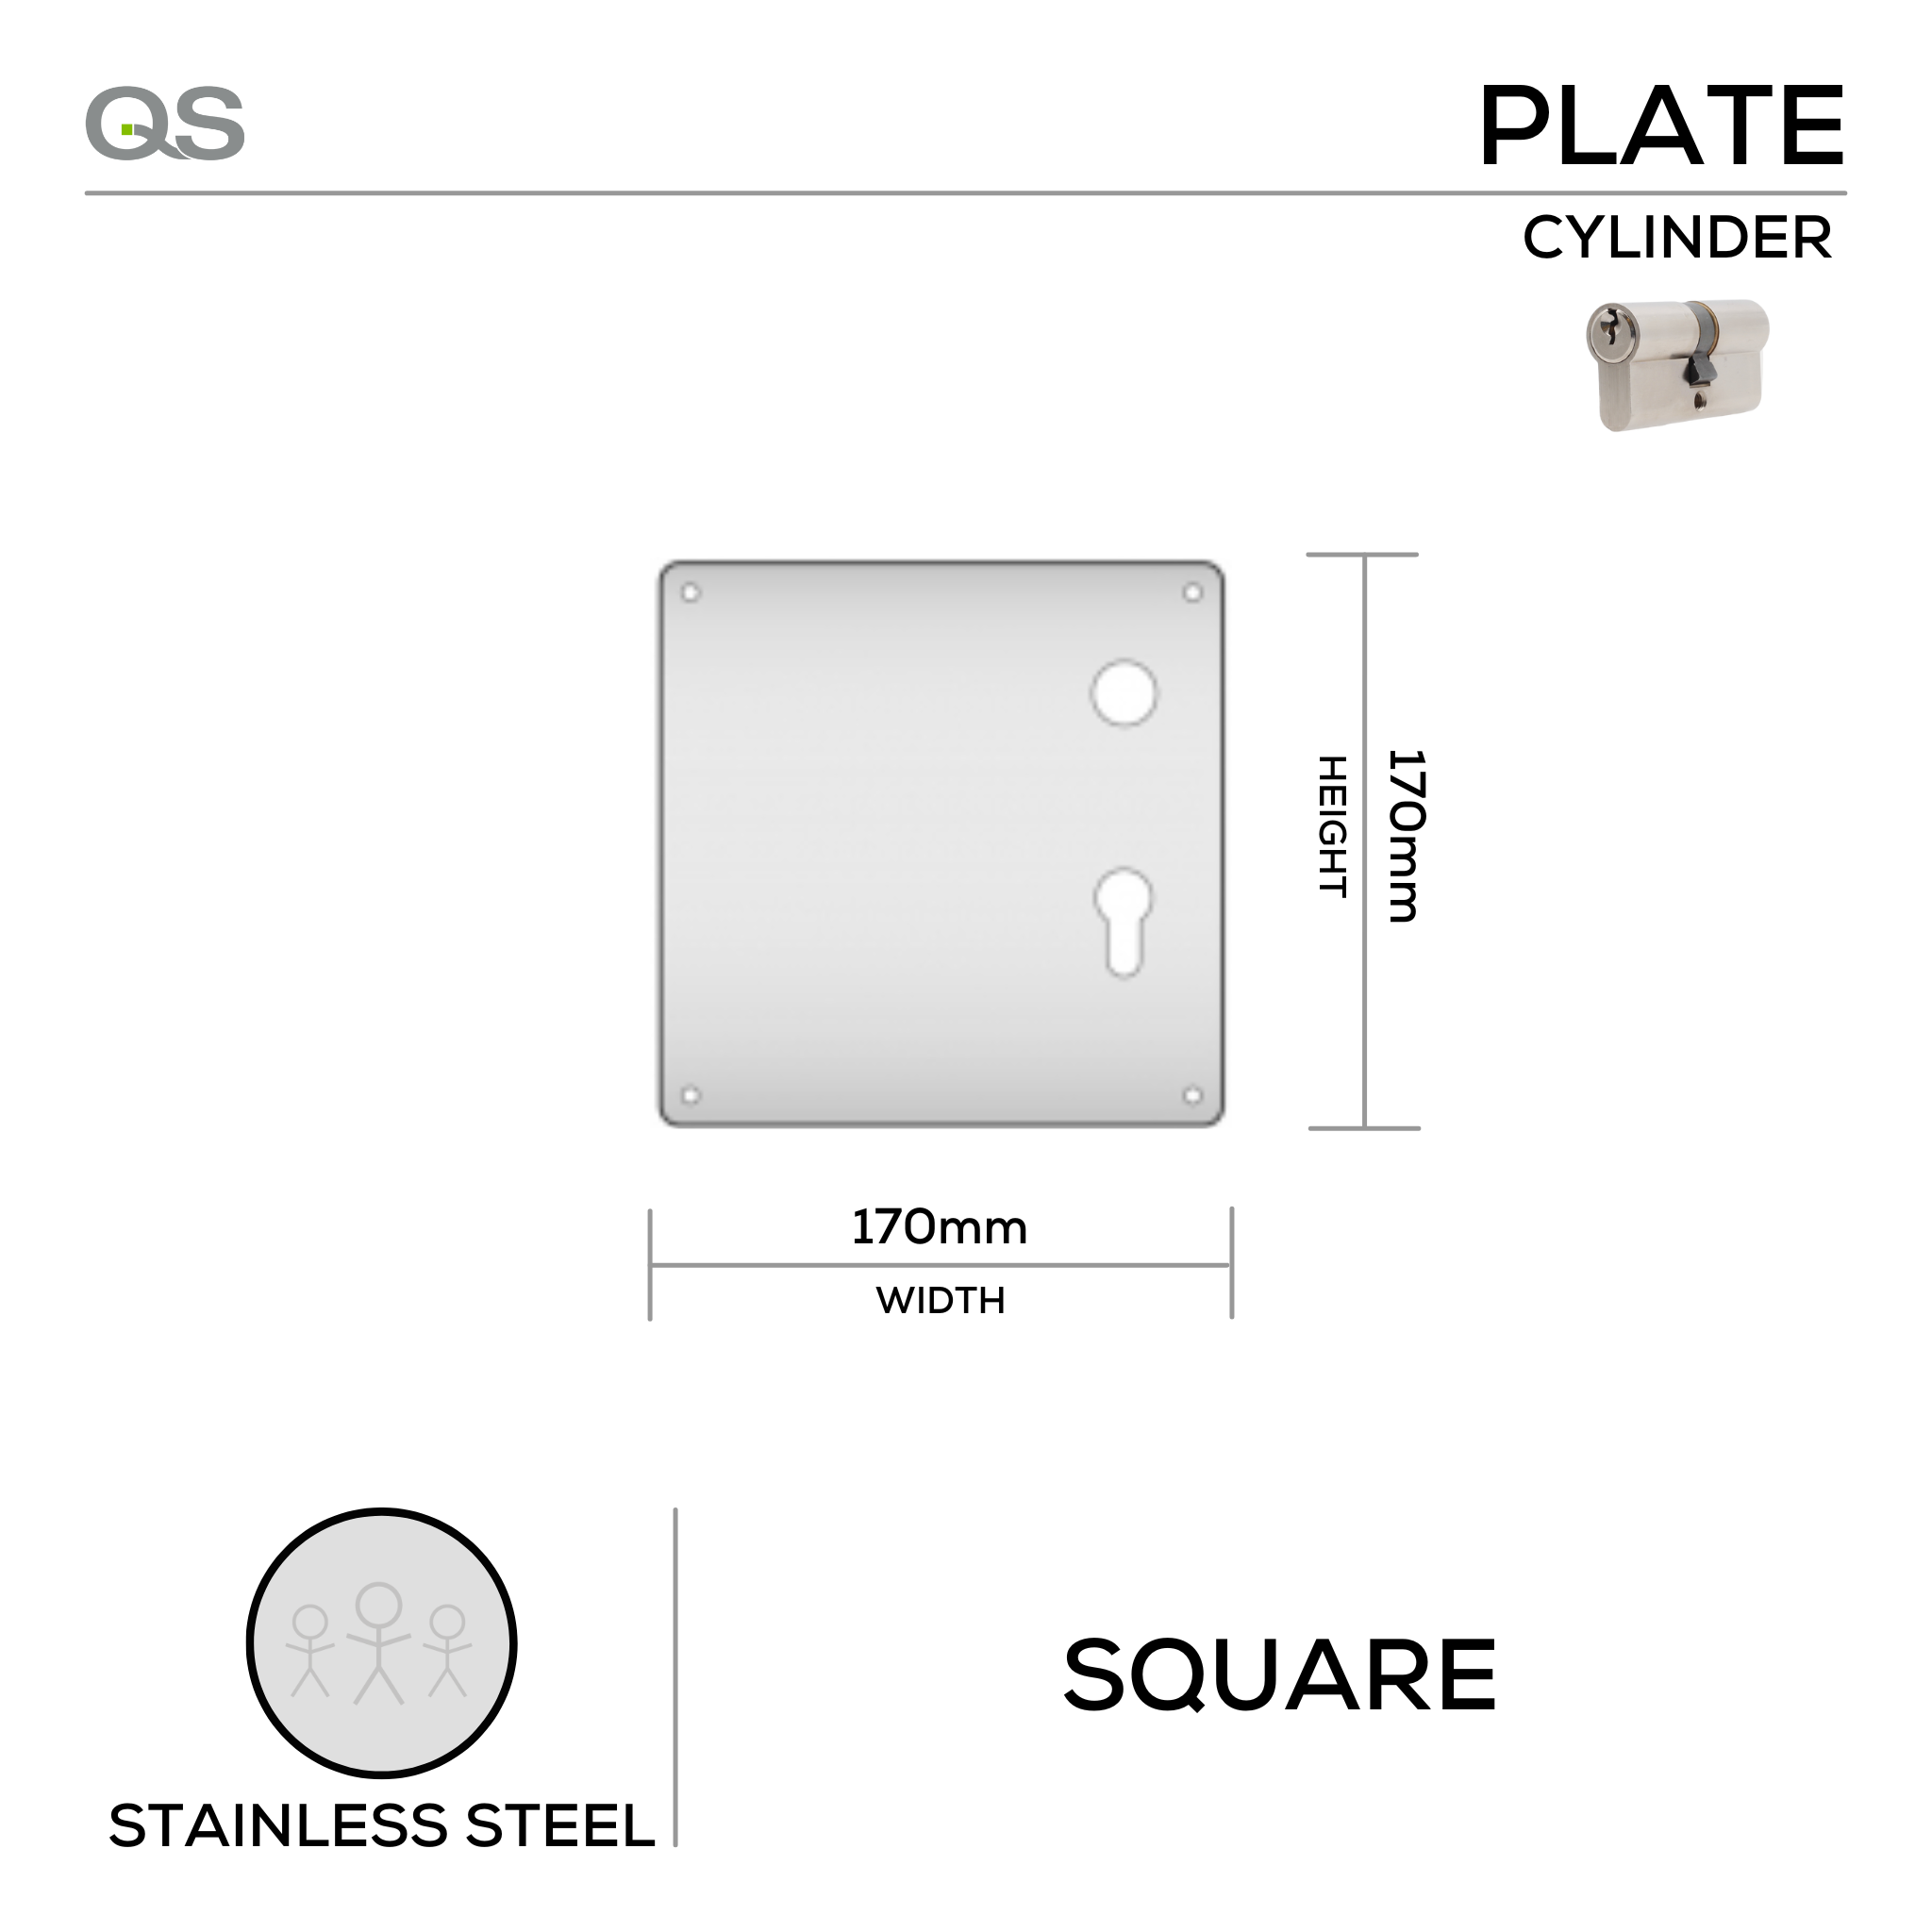 QS4485 CYL, Plate, Square, 170mm (l) x 170mm (w), (Price if purchasing a Qs handle at same time), Stainless Steel, QS